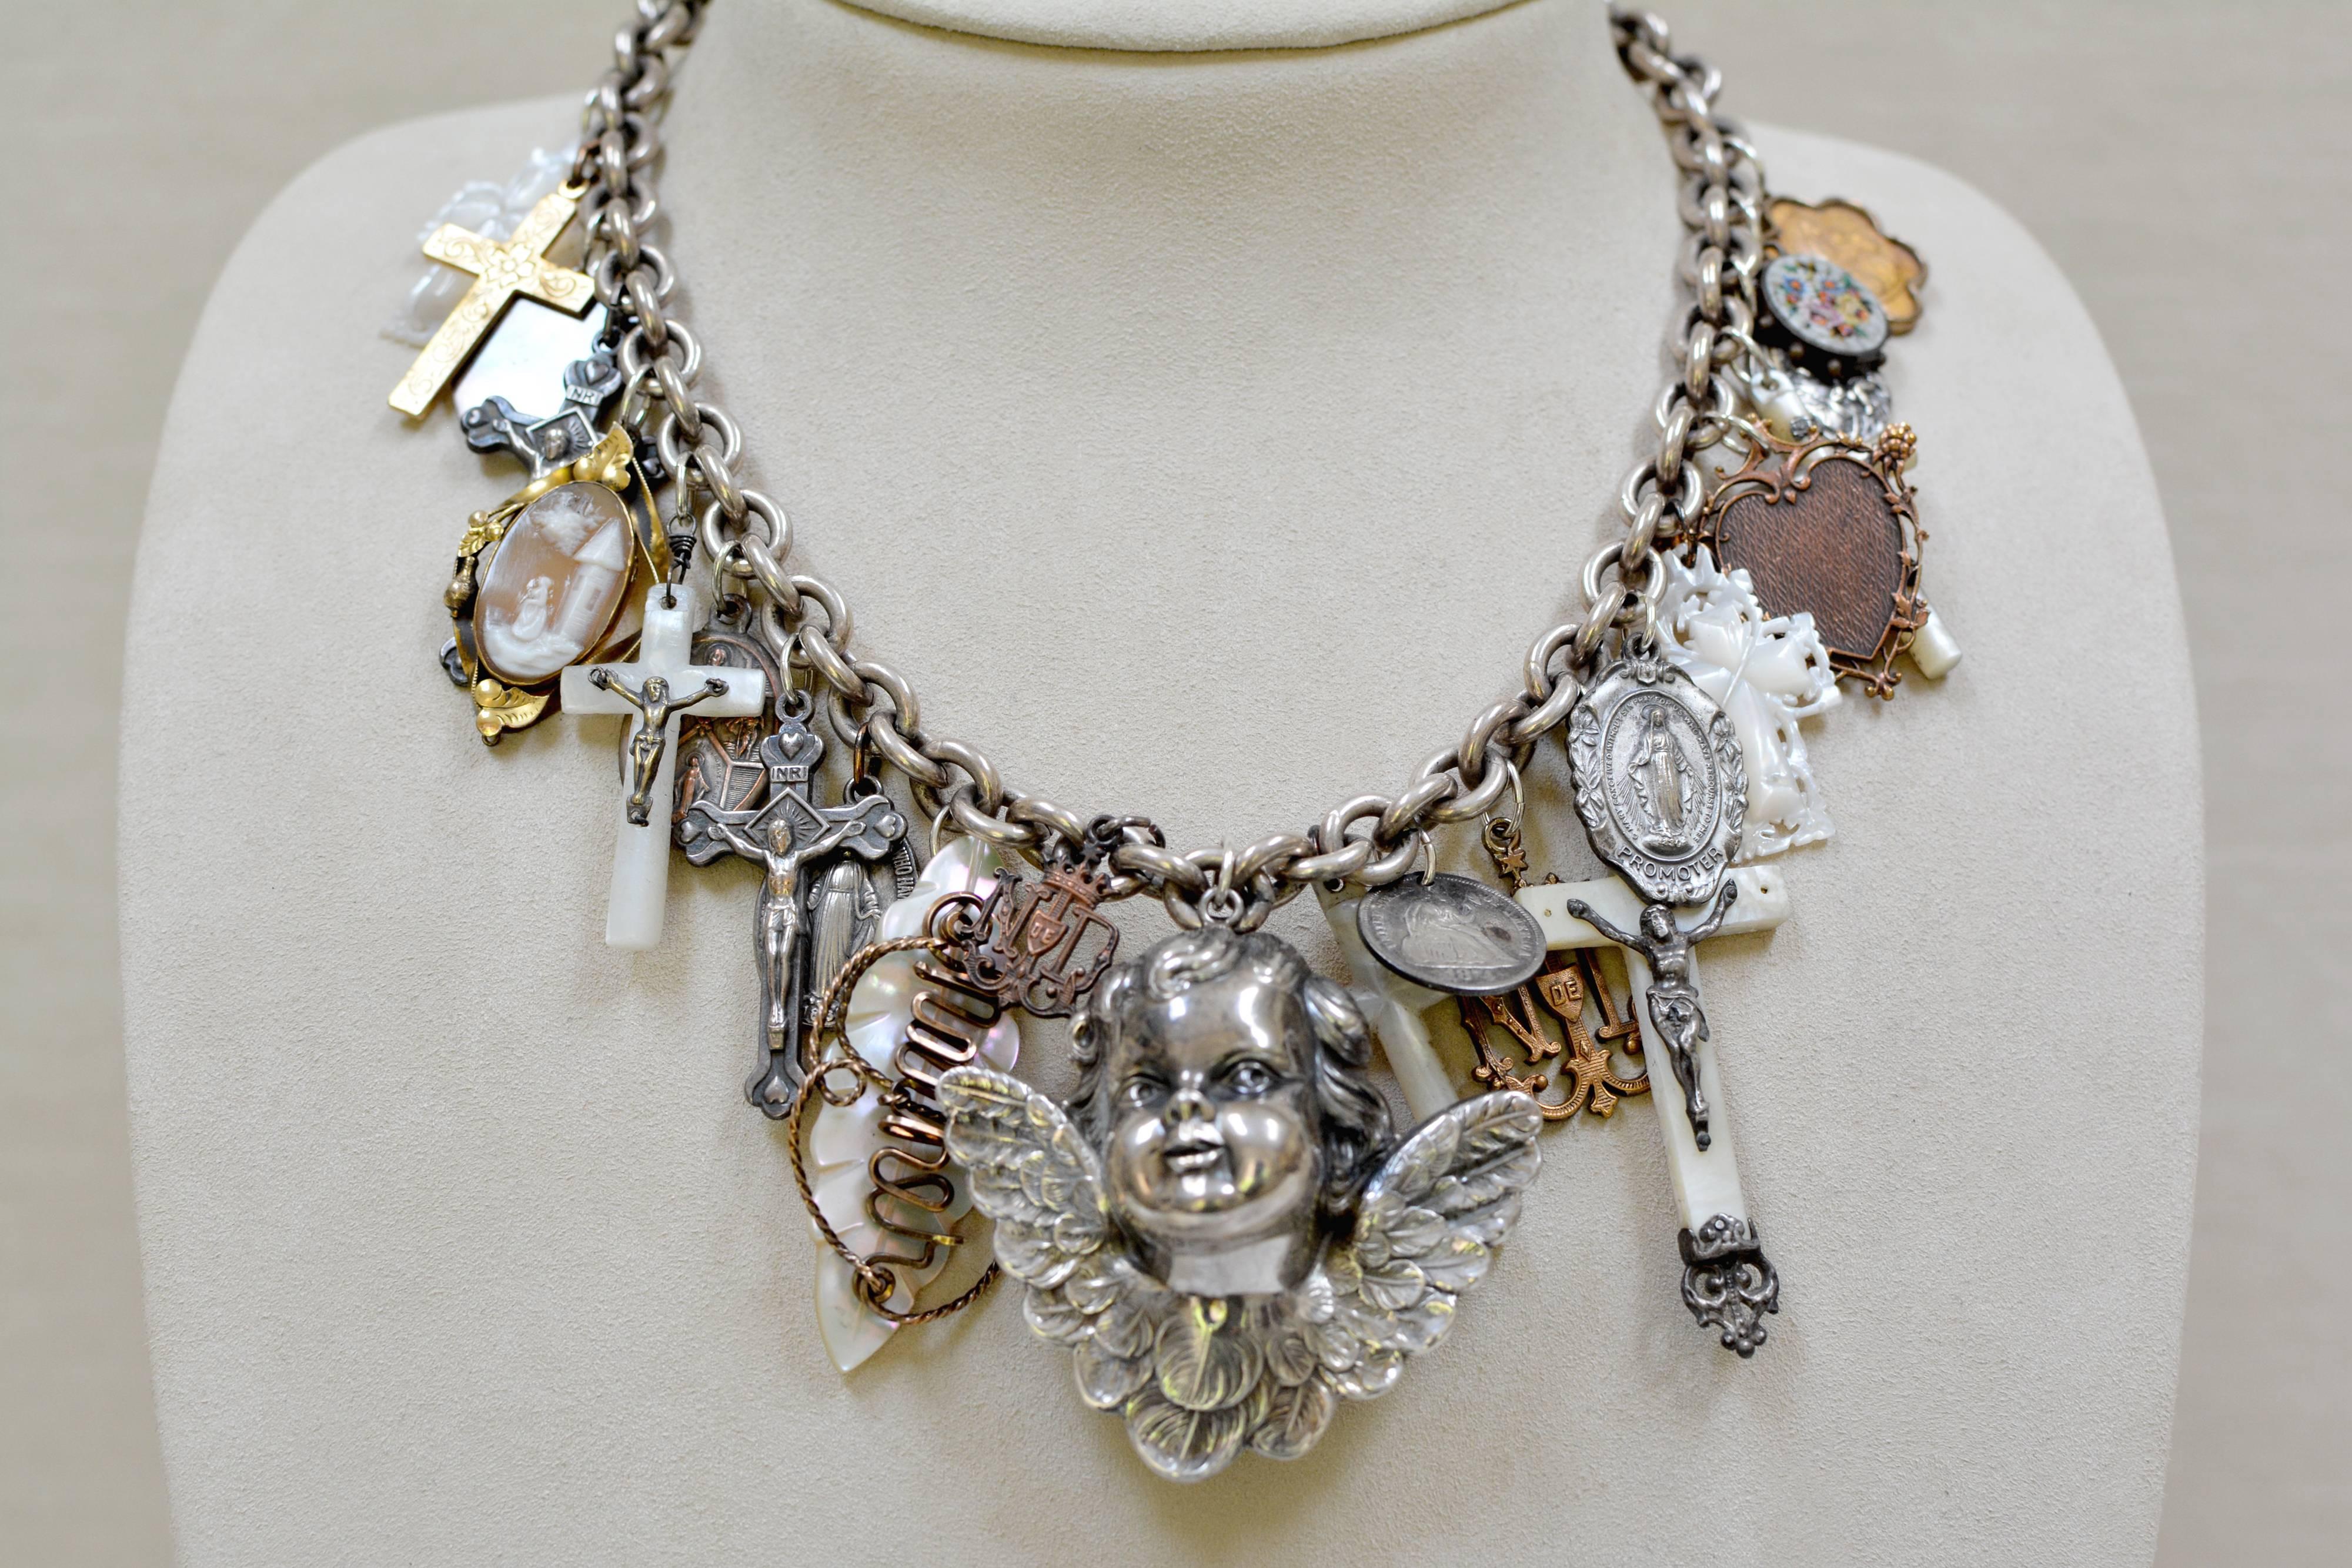 At the center of this one of a kind Love Token Festoon necklace is a large sterling silver antique figural winged cherub angel. With incredible charms and sacred treasures throughout a bold sterling silver chain. Carved Mother-of-Pearl Christening